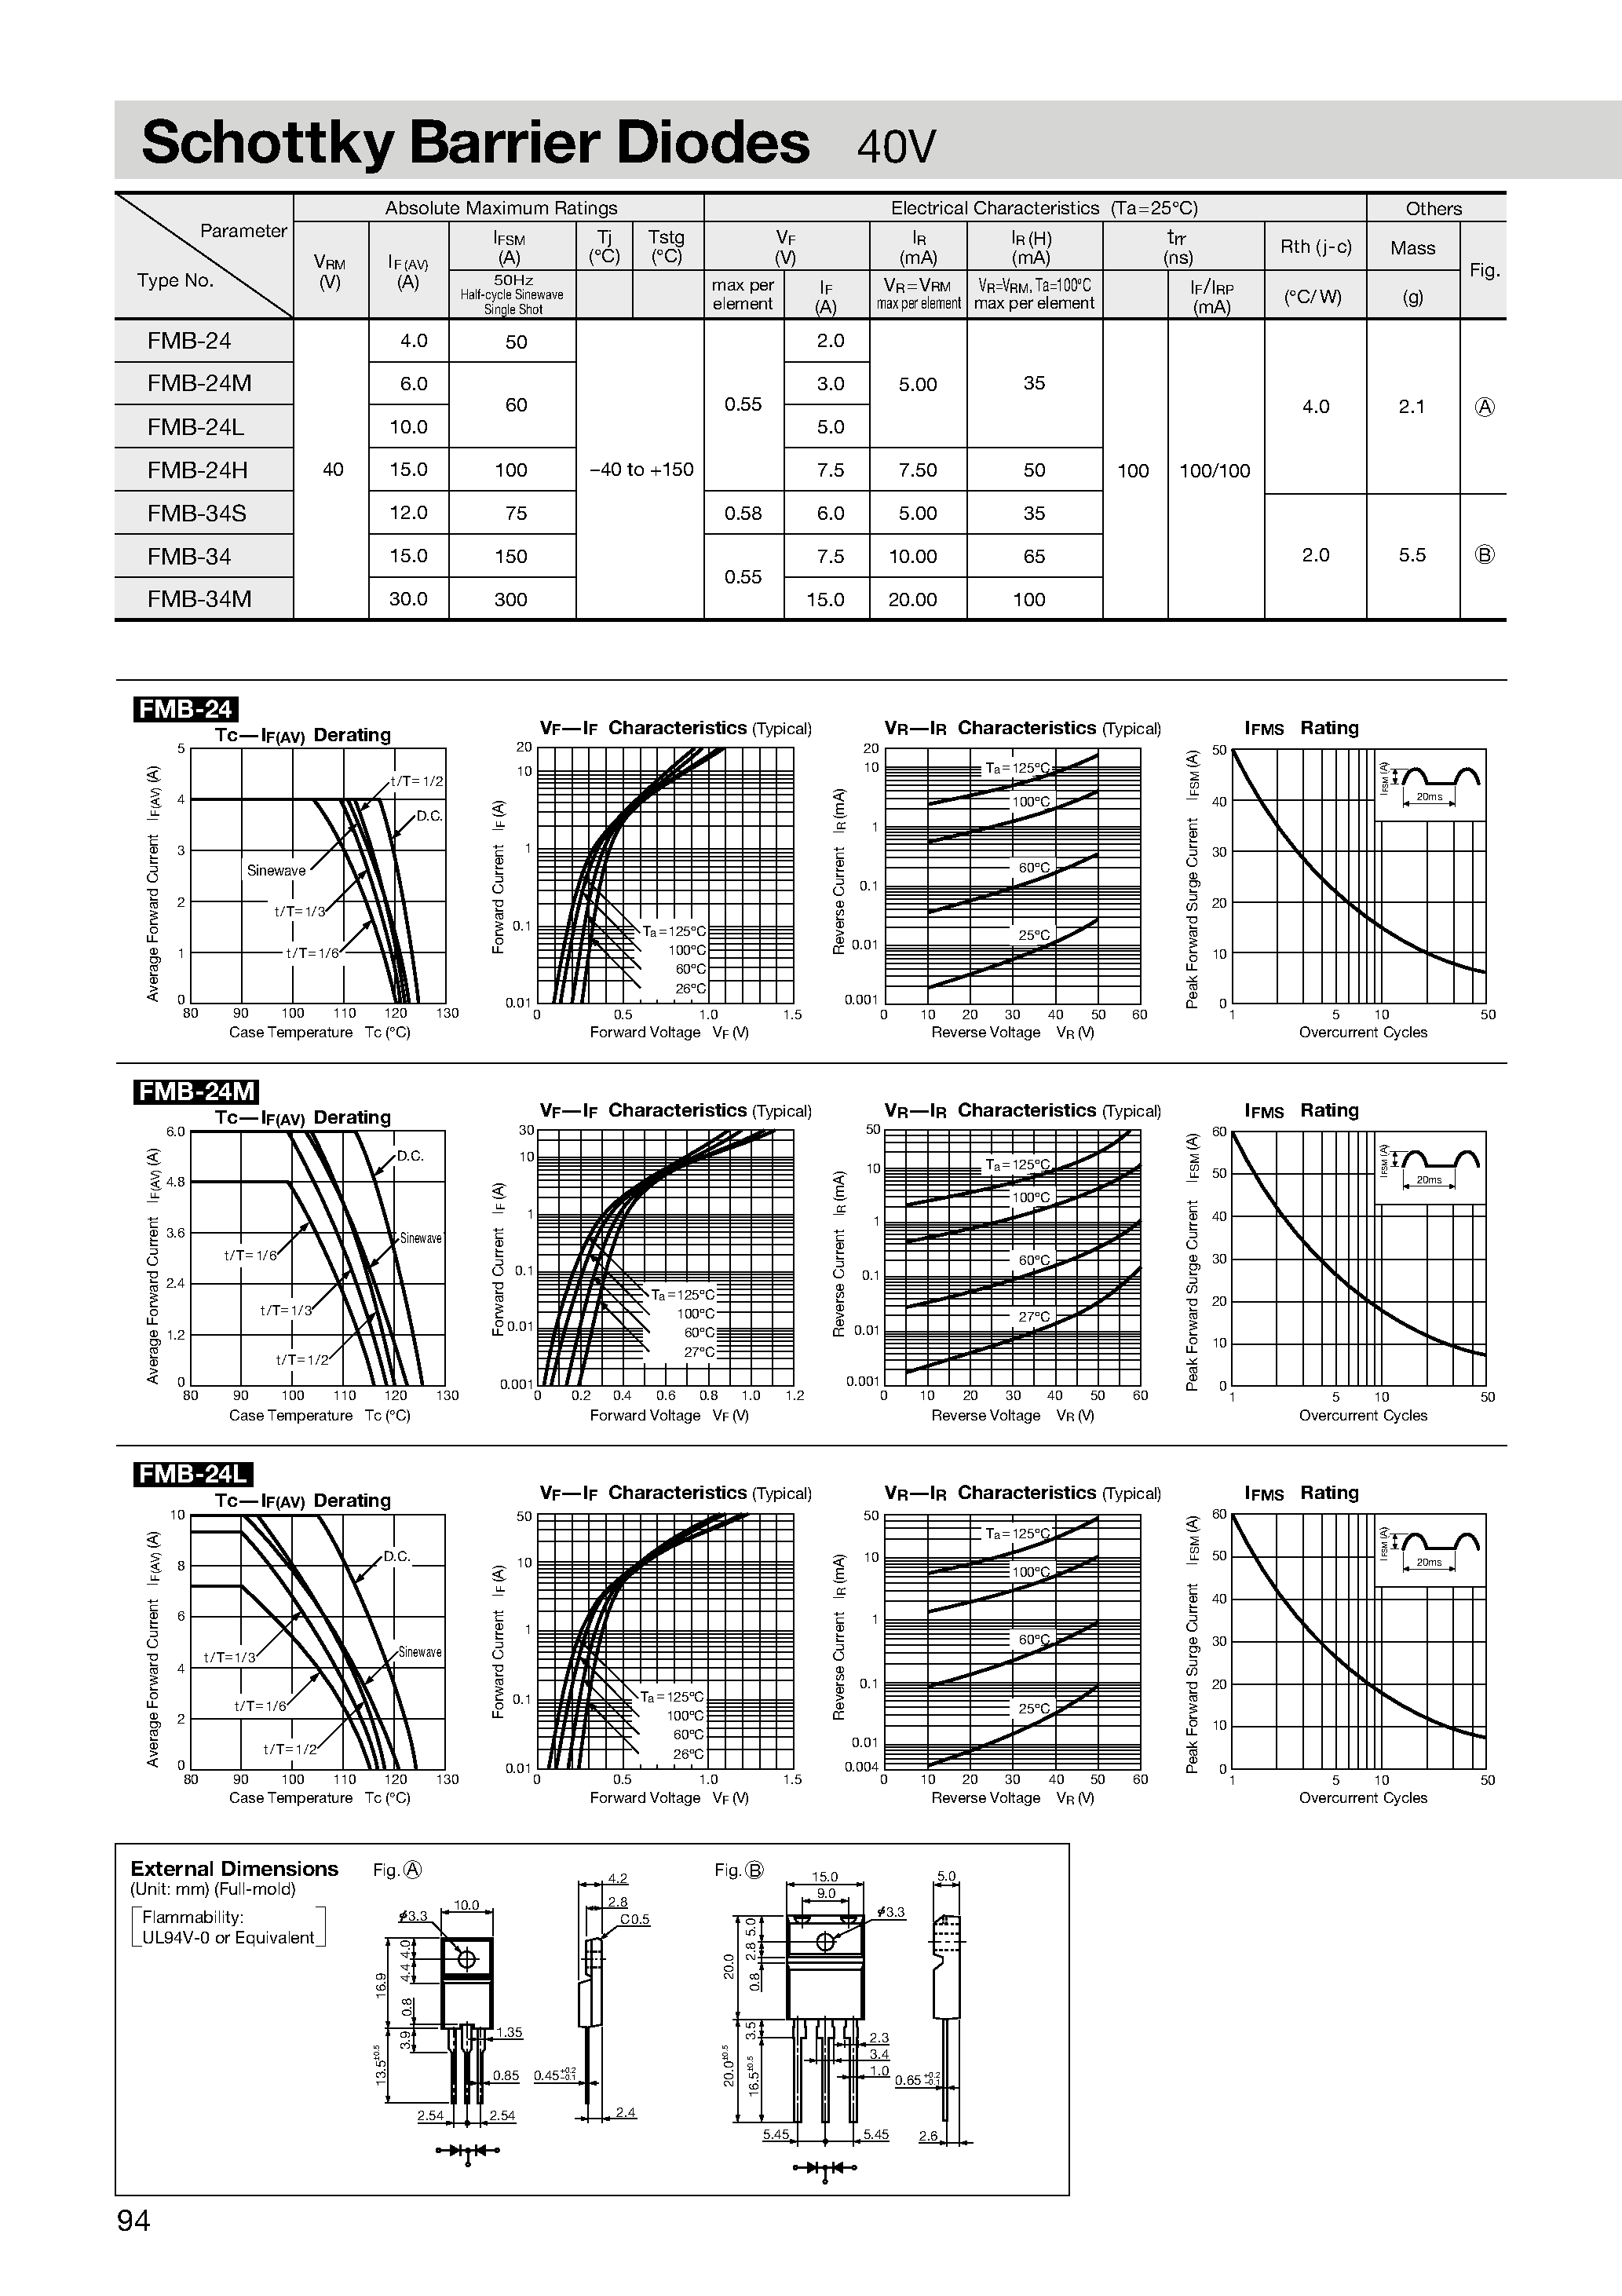 Datasheet FMB-34 - Schottky Barrier Diodes 40V page 1